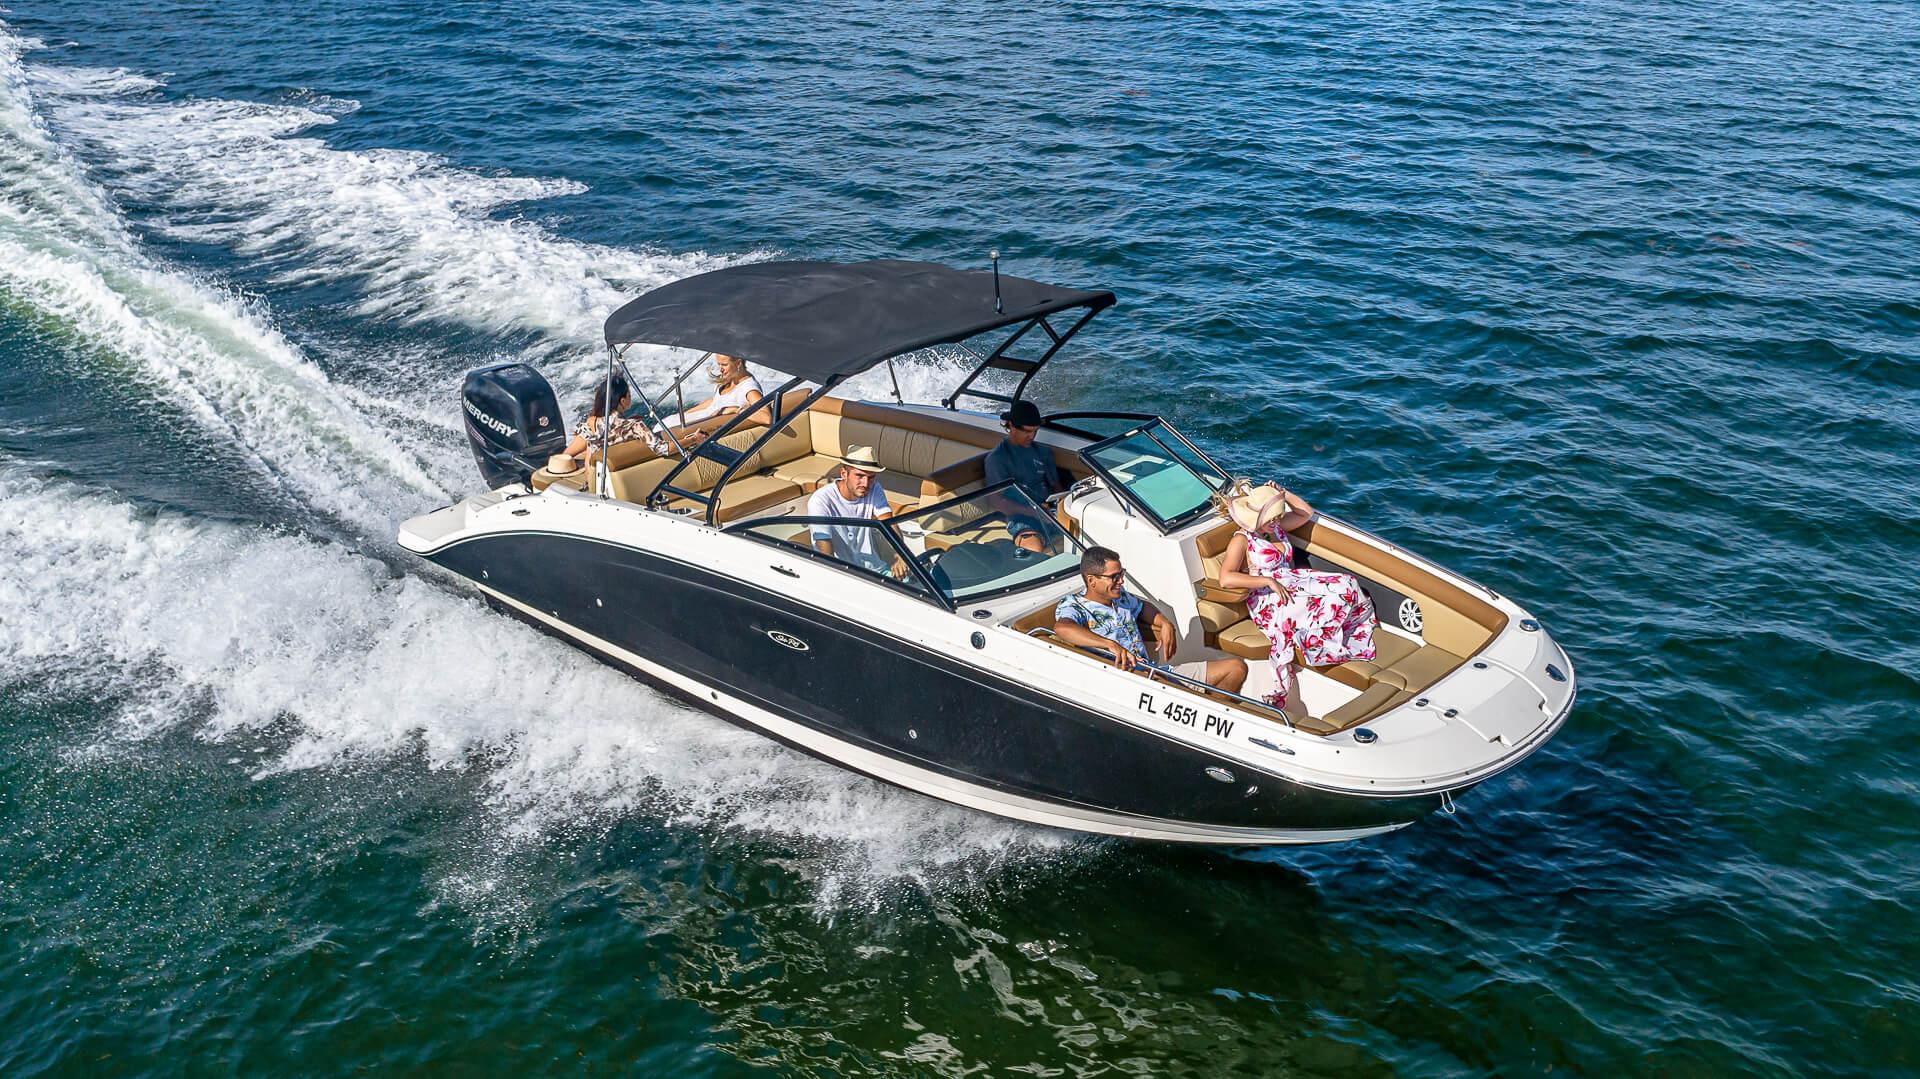 Book Miami Bachelor Boat Parties Online with Aquarius Boat Rental and Tours